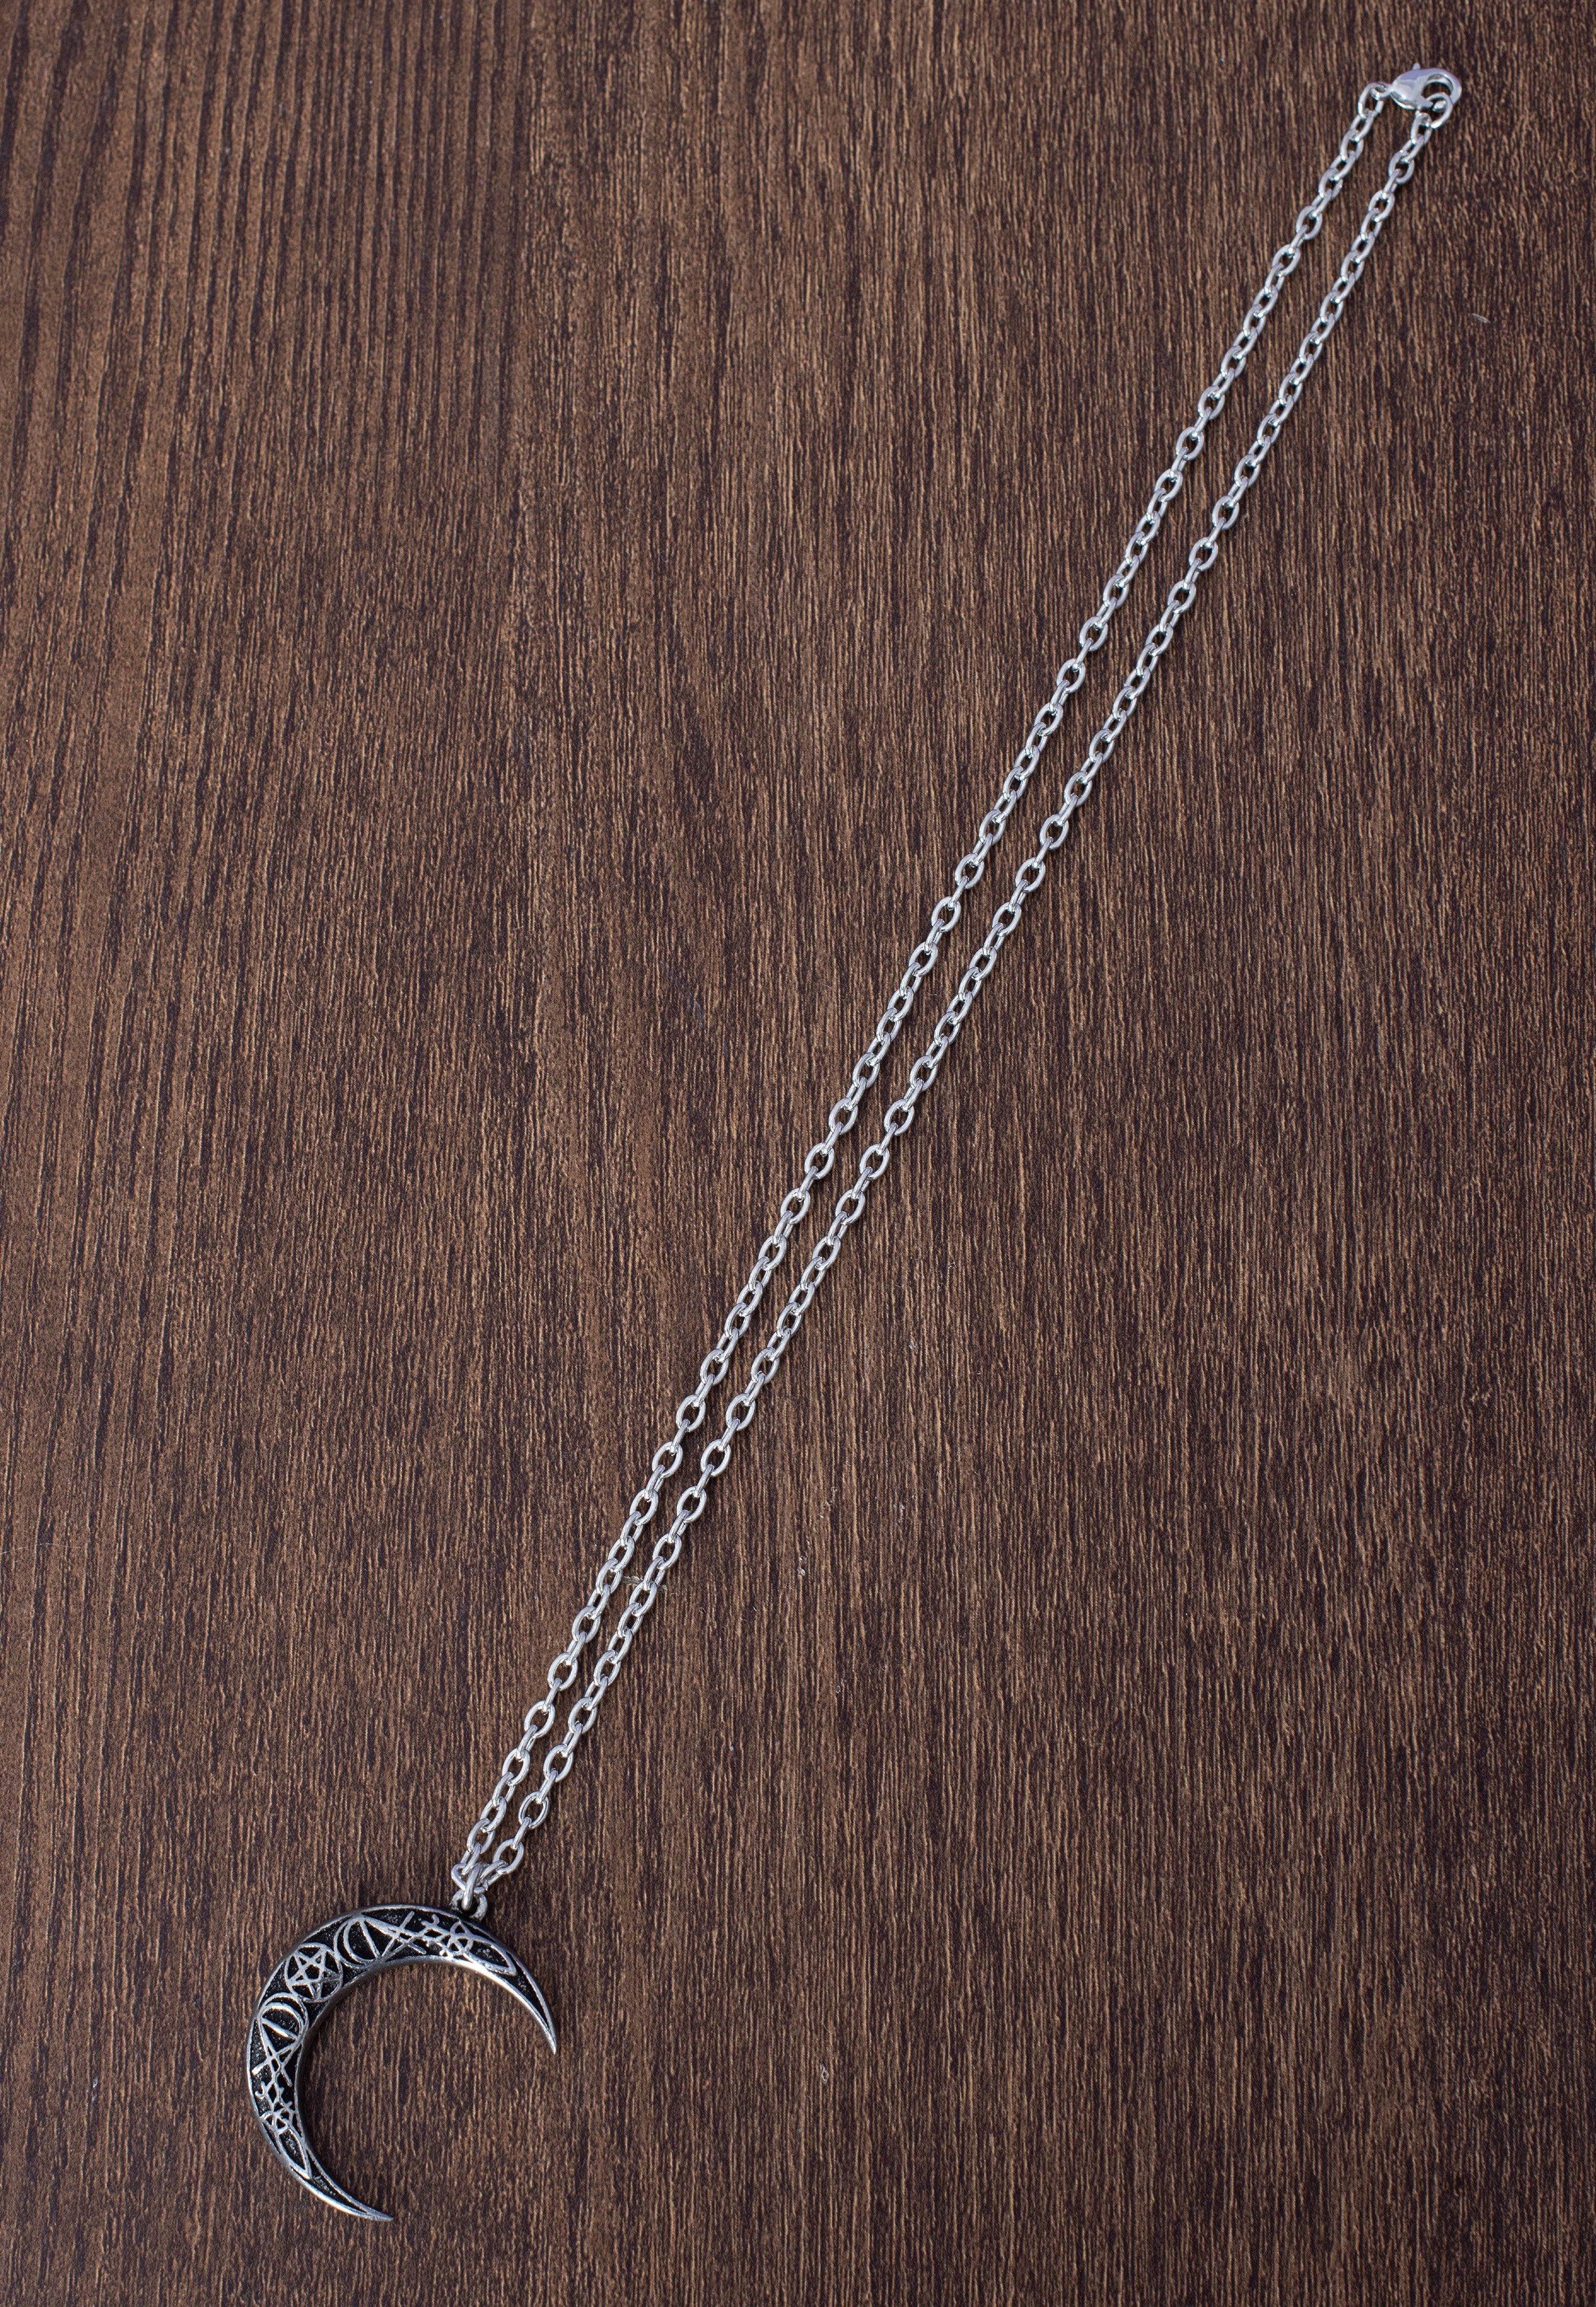 Alchemy England - A Pact With A Prince Silver - Necklace